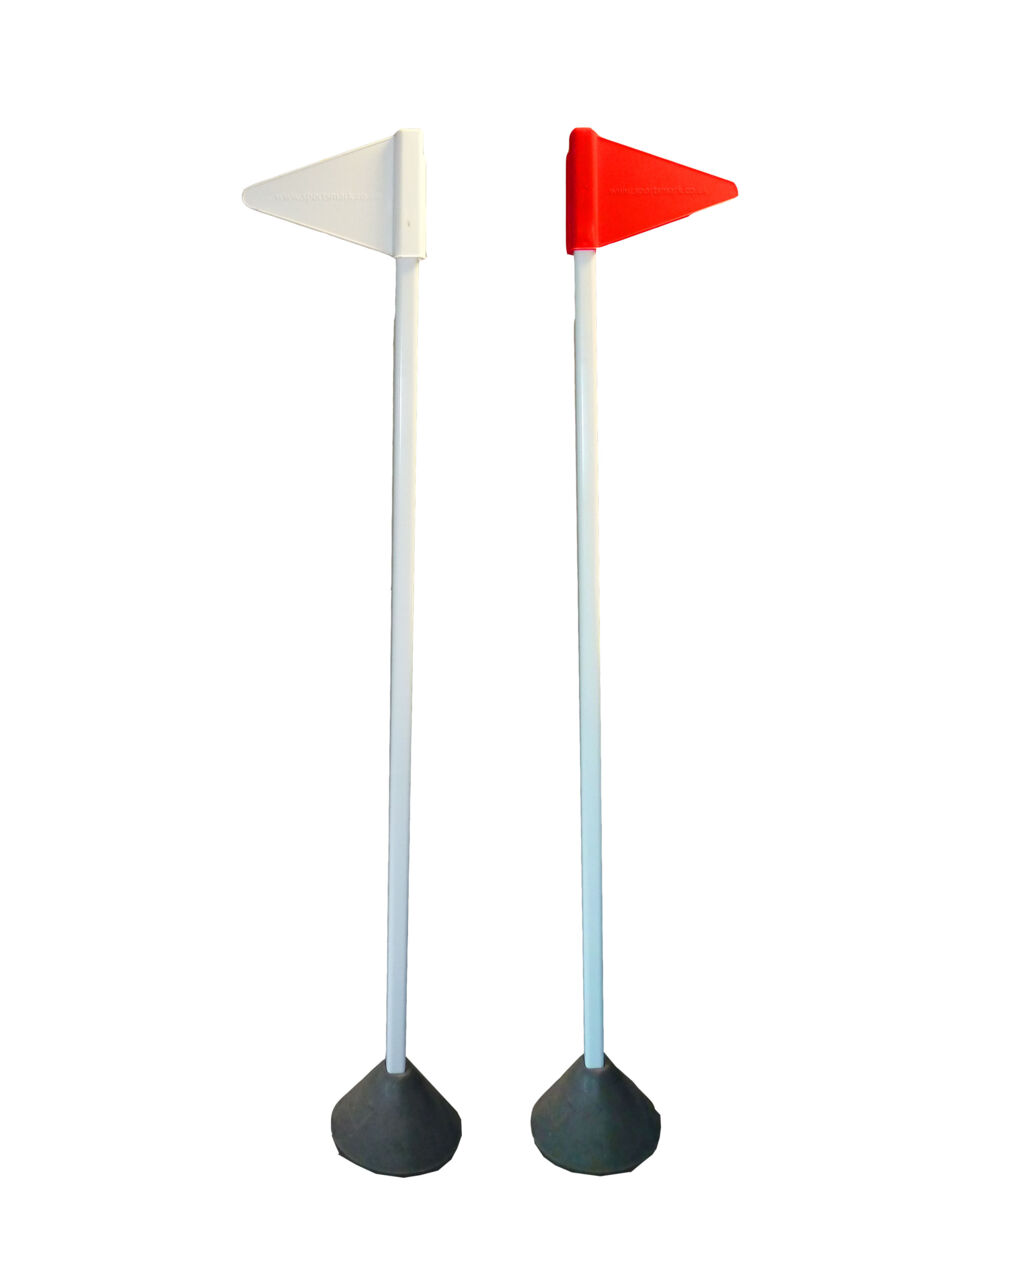 Flags with heavy bases